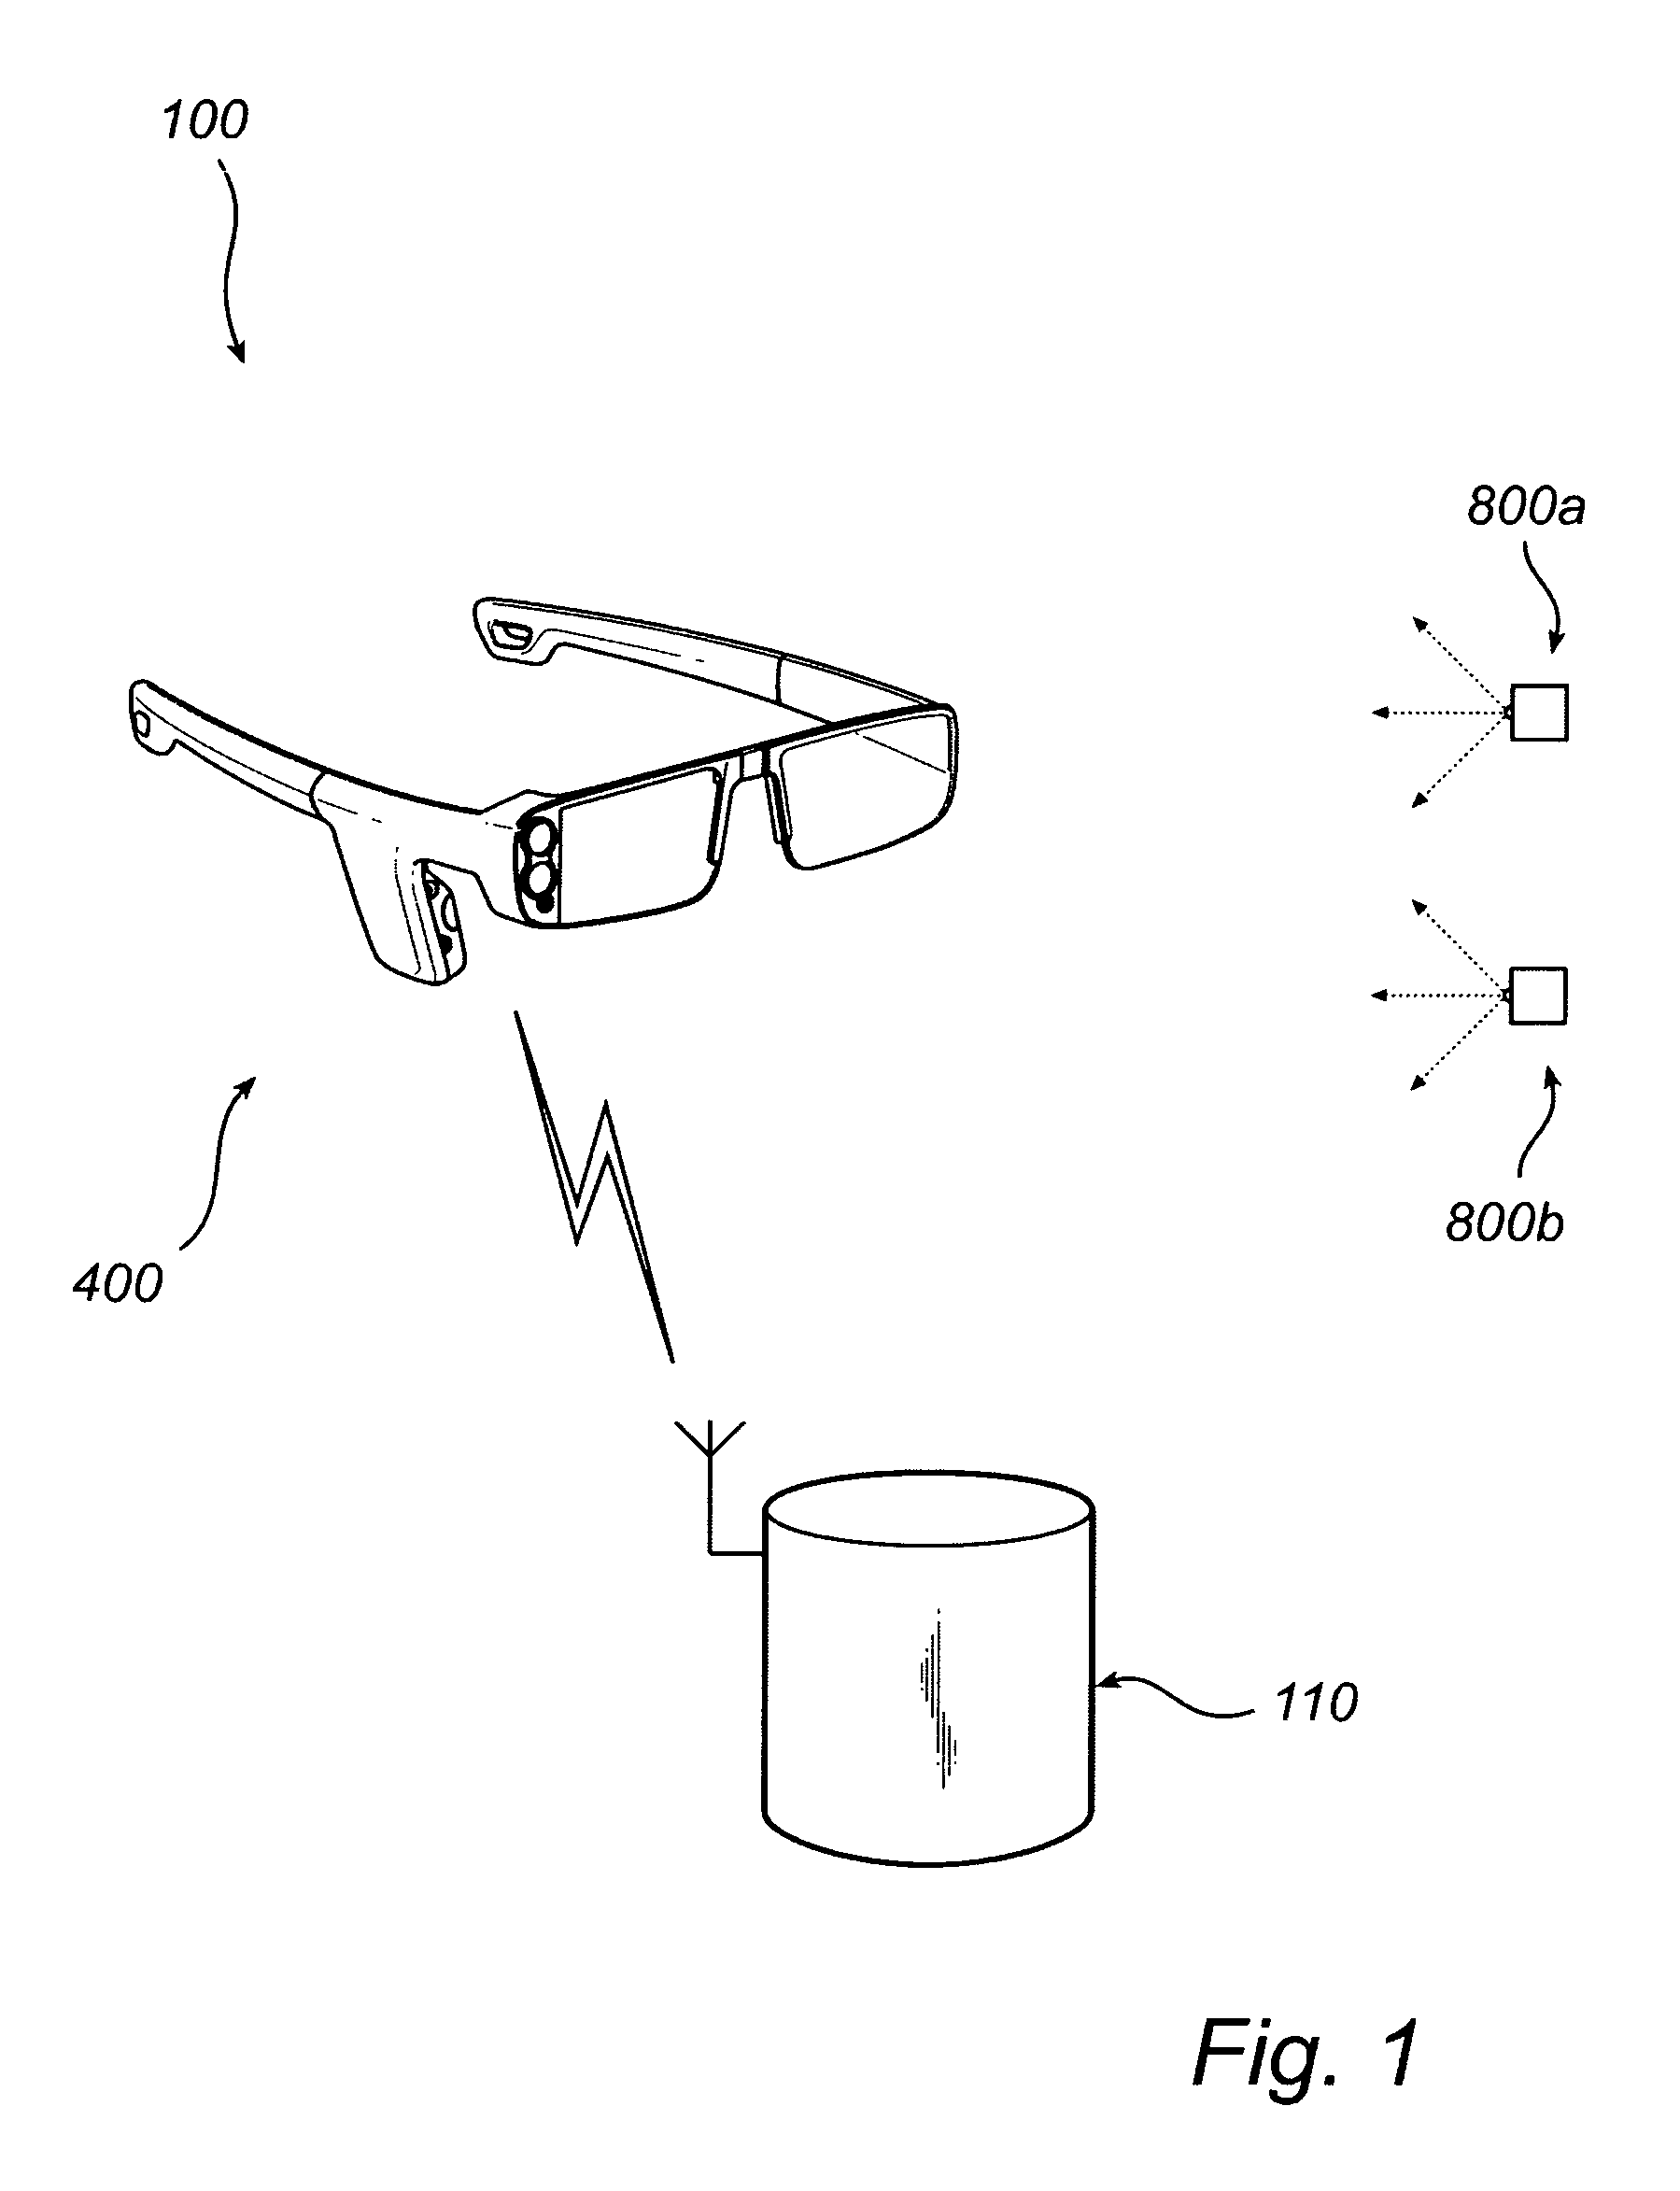 Detection of gaze point assisted by optical reference signal